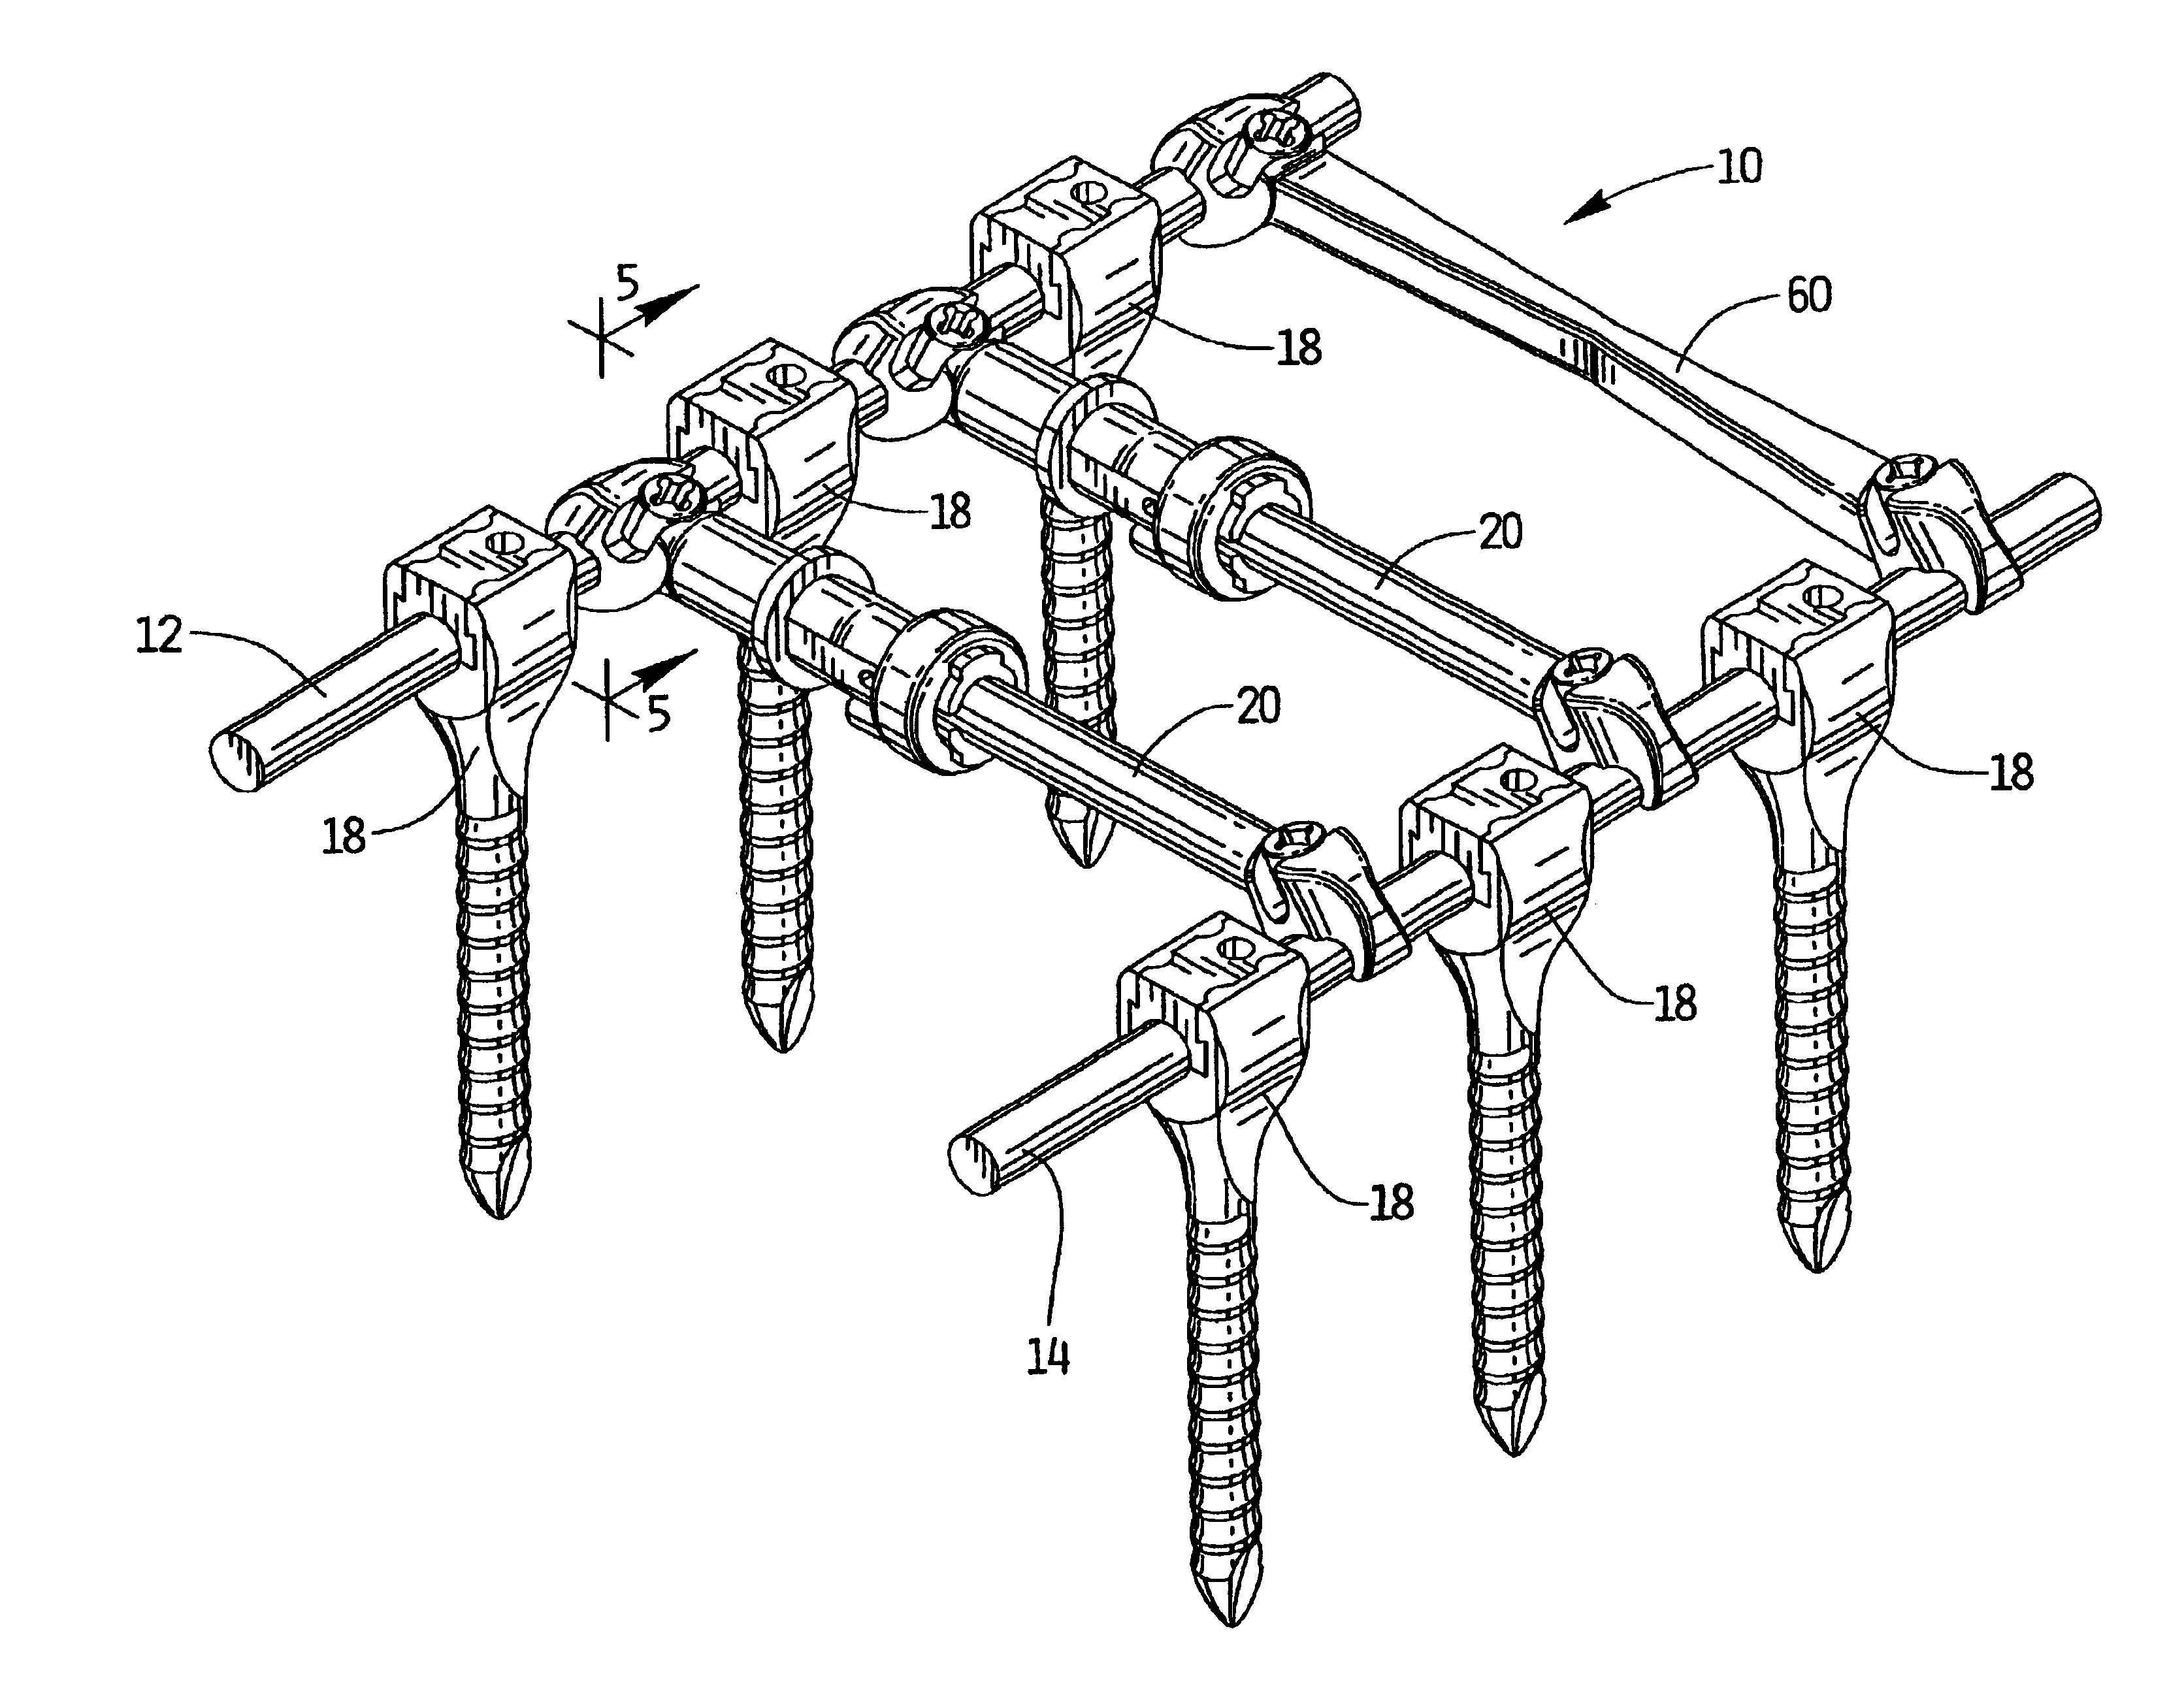 Apparatus for spinal stabilization